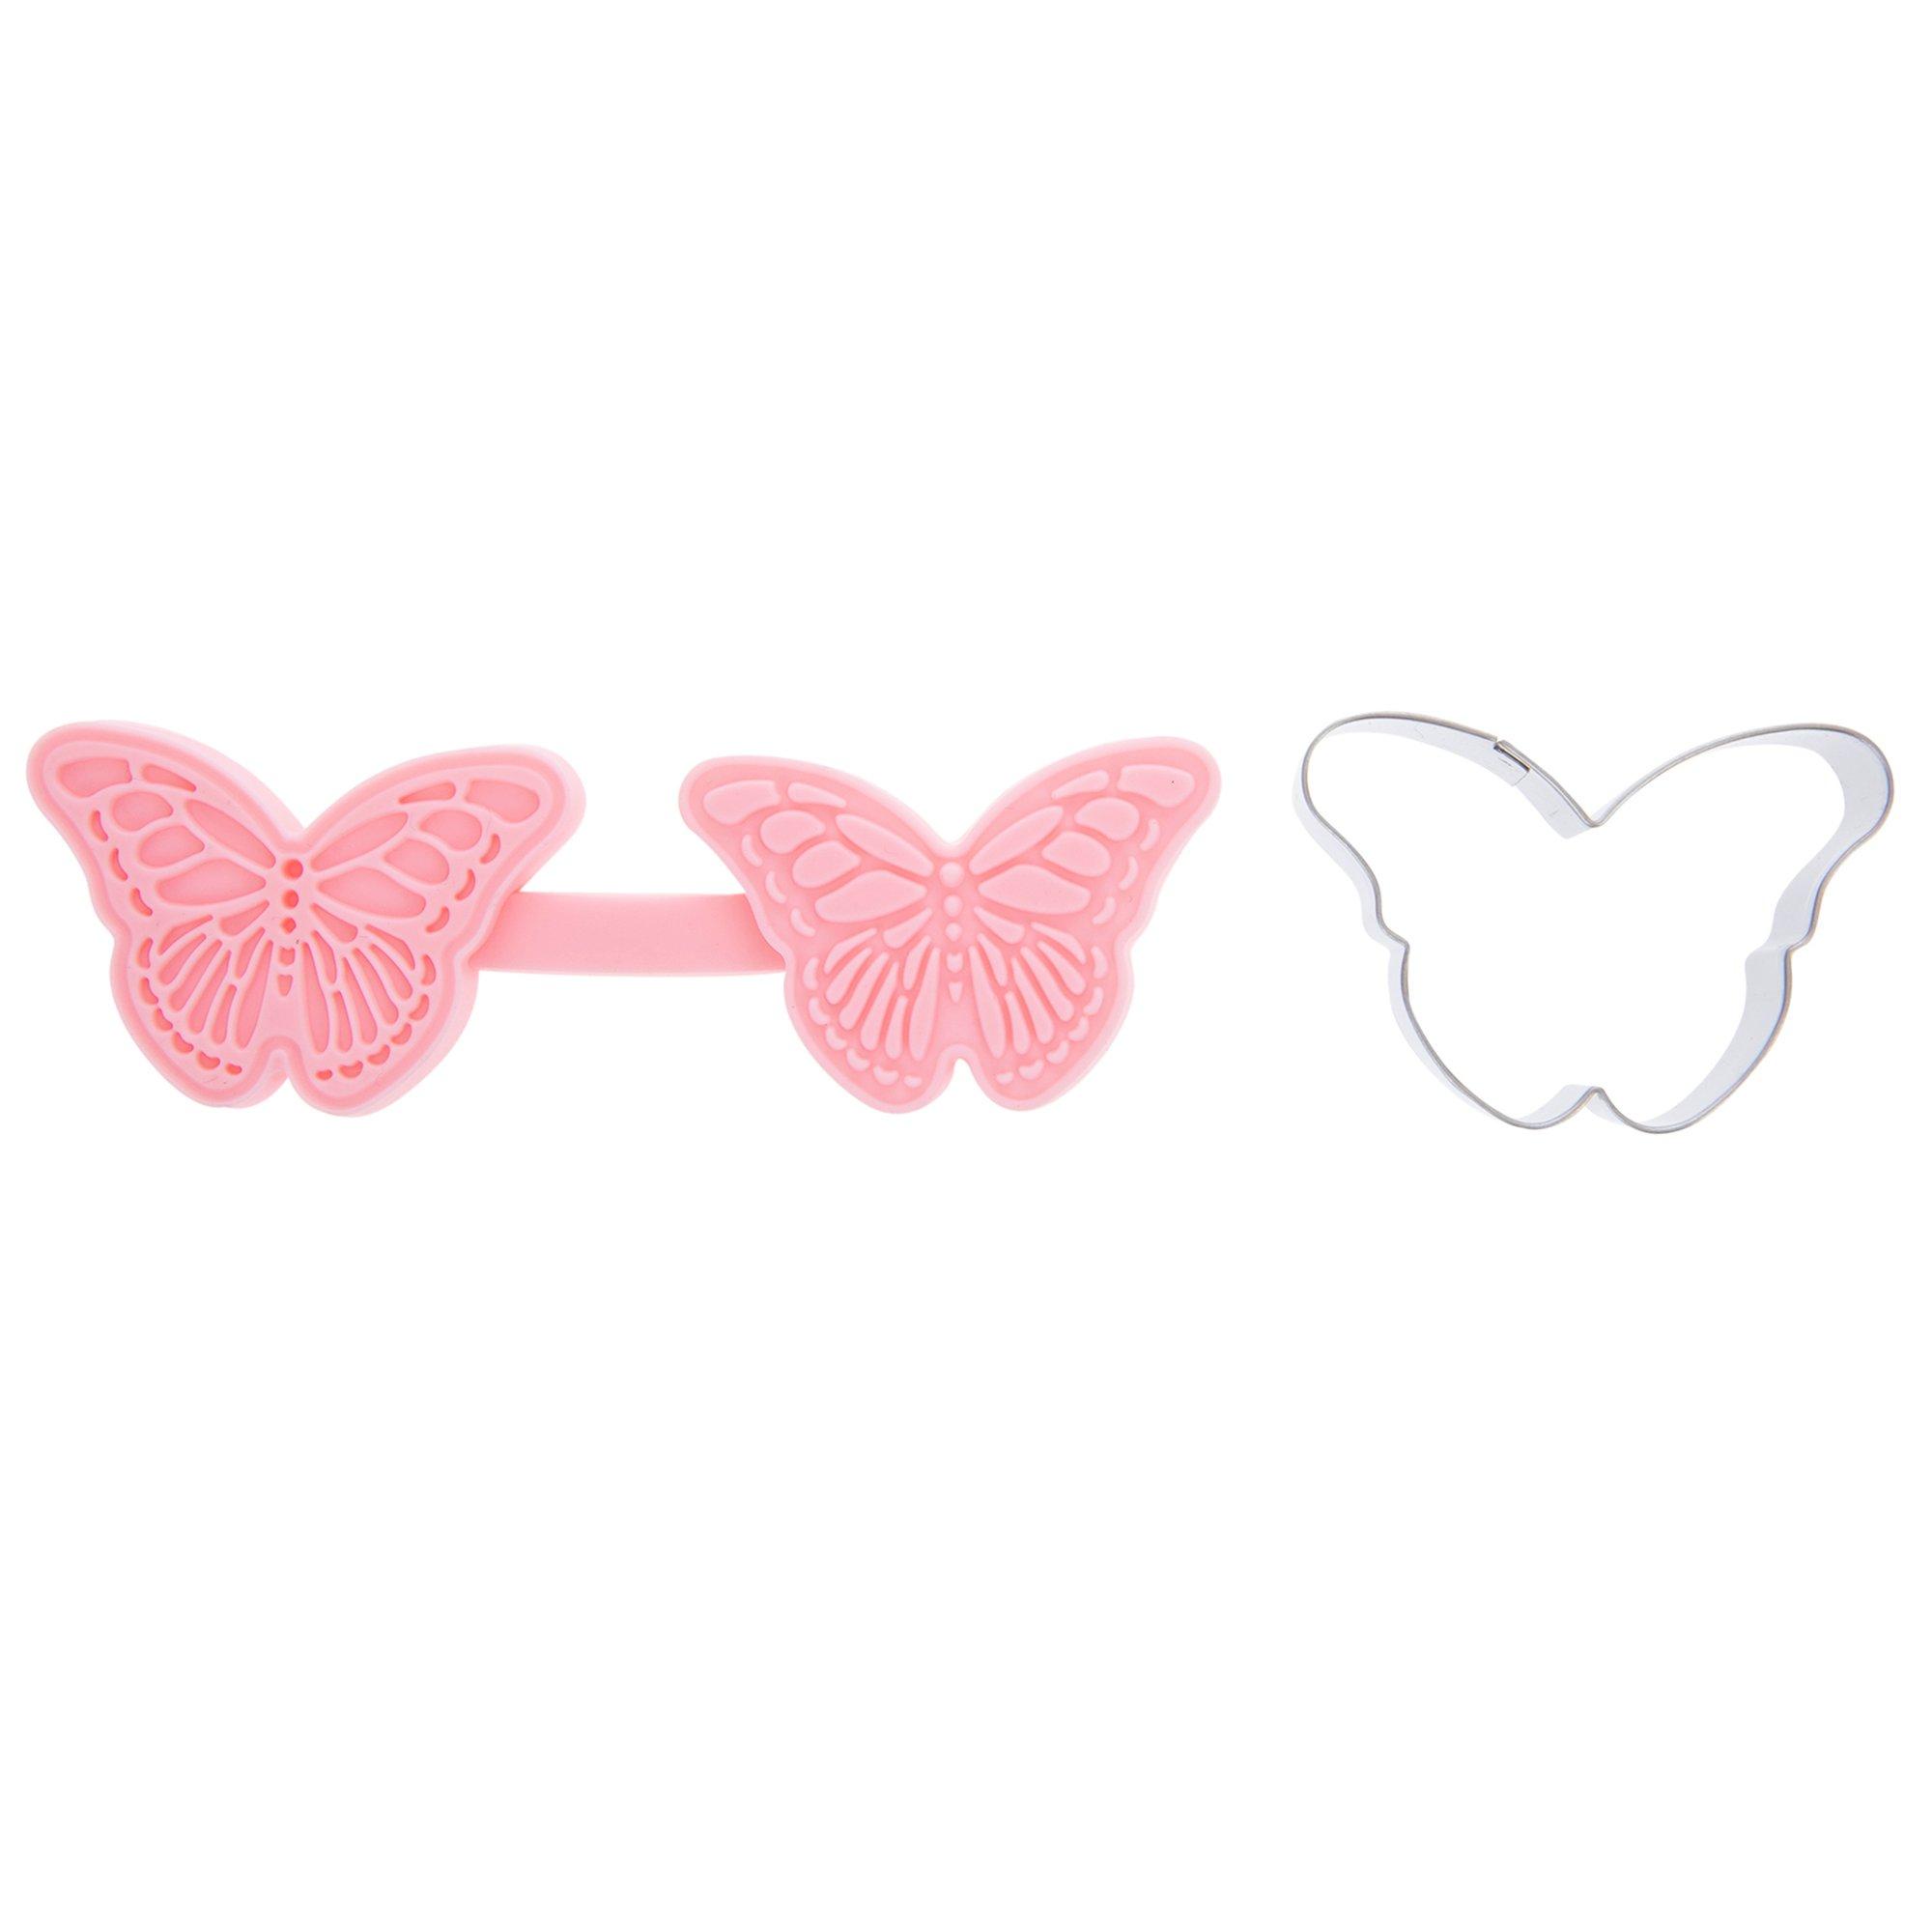 FLEXARTE Butterfly Butterflies Lace Mat Silicone Mold for Cake Cupcake Decorating Sugar Mold Candy Mould DIY, Size: One Size